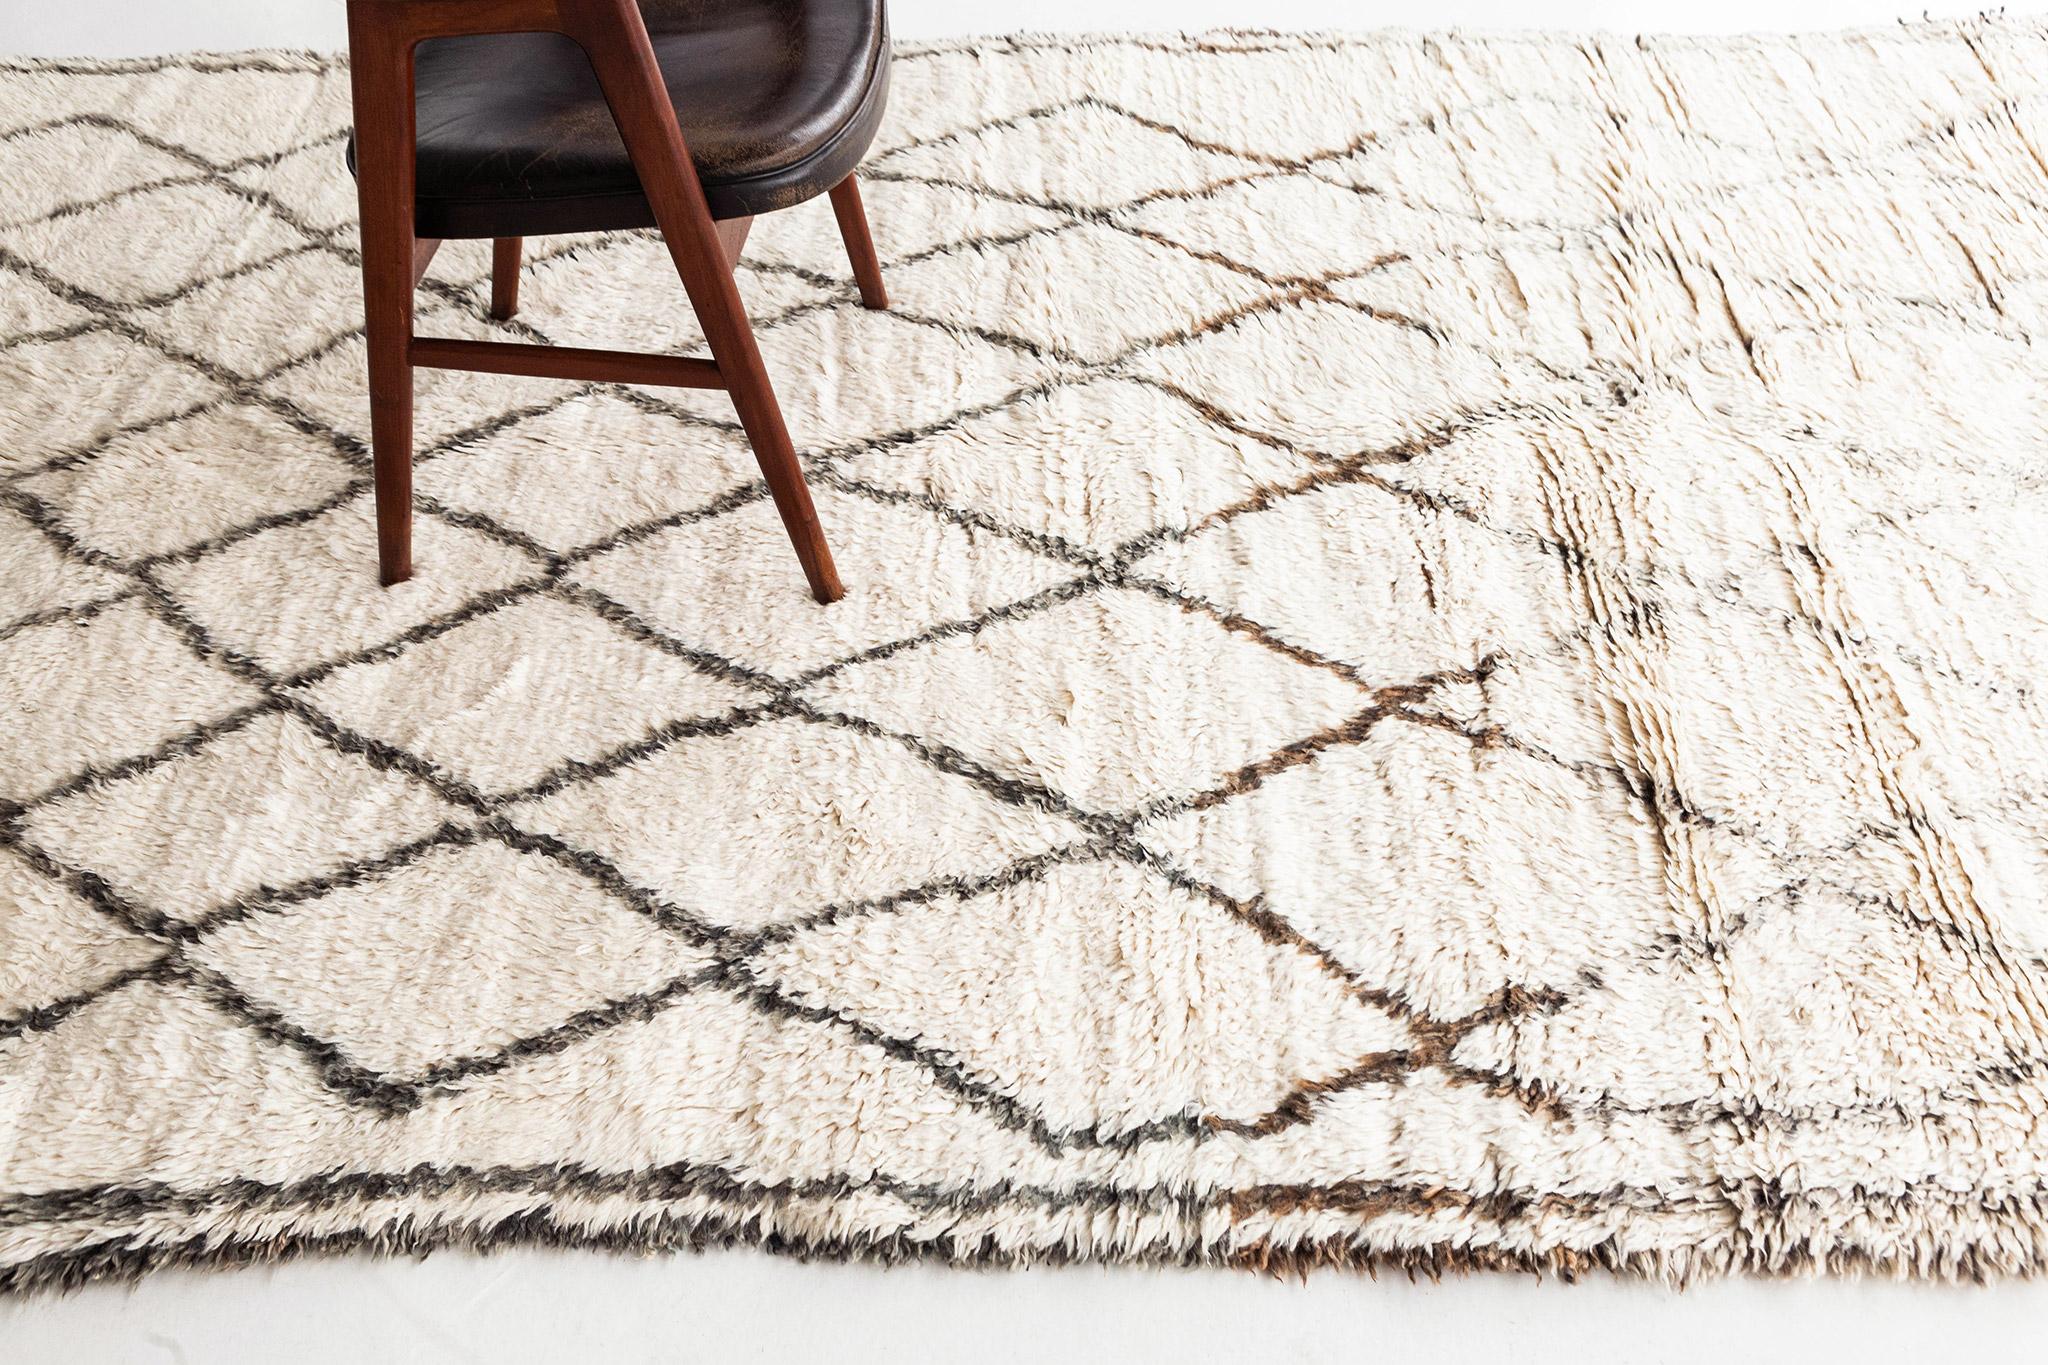 Ivory pile field with diamond lattice rendered in gray wool. Double edge lines frame the field. An elegant and unique vintage rug from the Beni Ourain peoples of Morocco. 